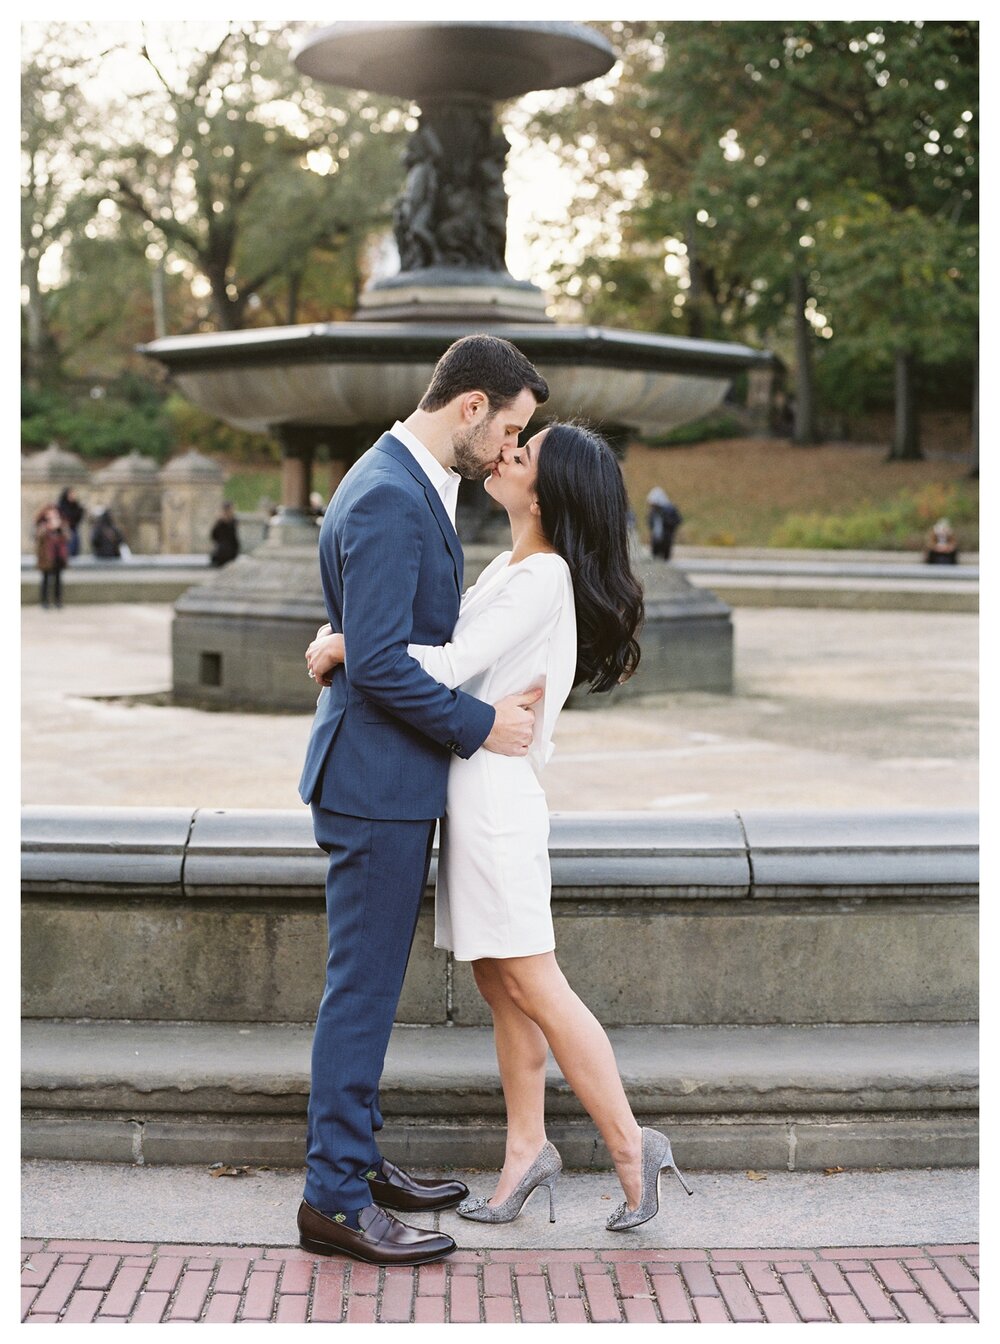  Engagement session at bethesda fountain in central park, fall engagement session in central park, autumn engagement session in central park, engagement session poses, engagement sessions outfits, new york engagement, central park engagement   